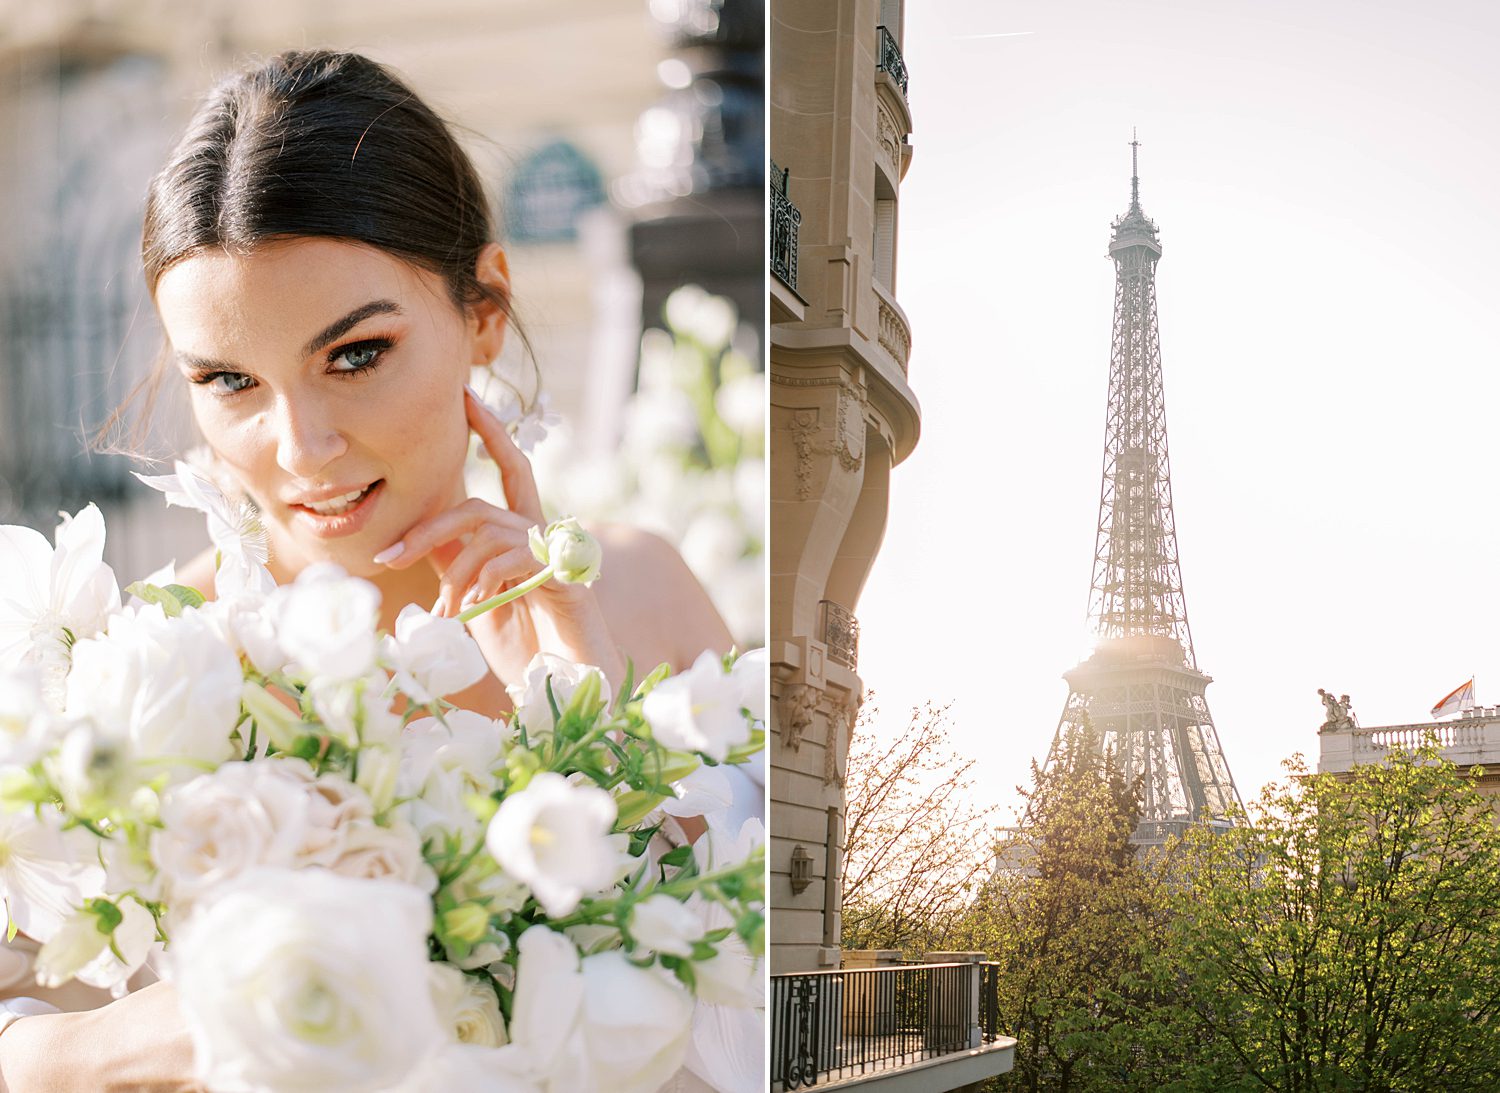 bride holds bouquet of white flowers by Eiffel Tower during elopement